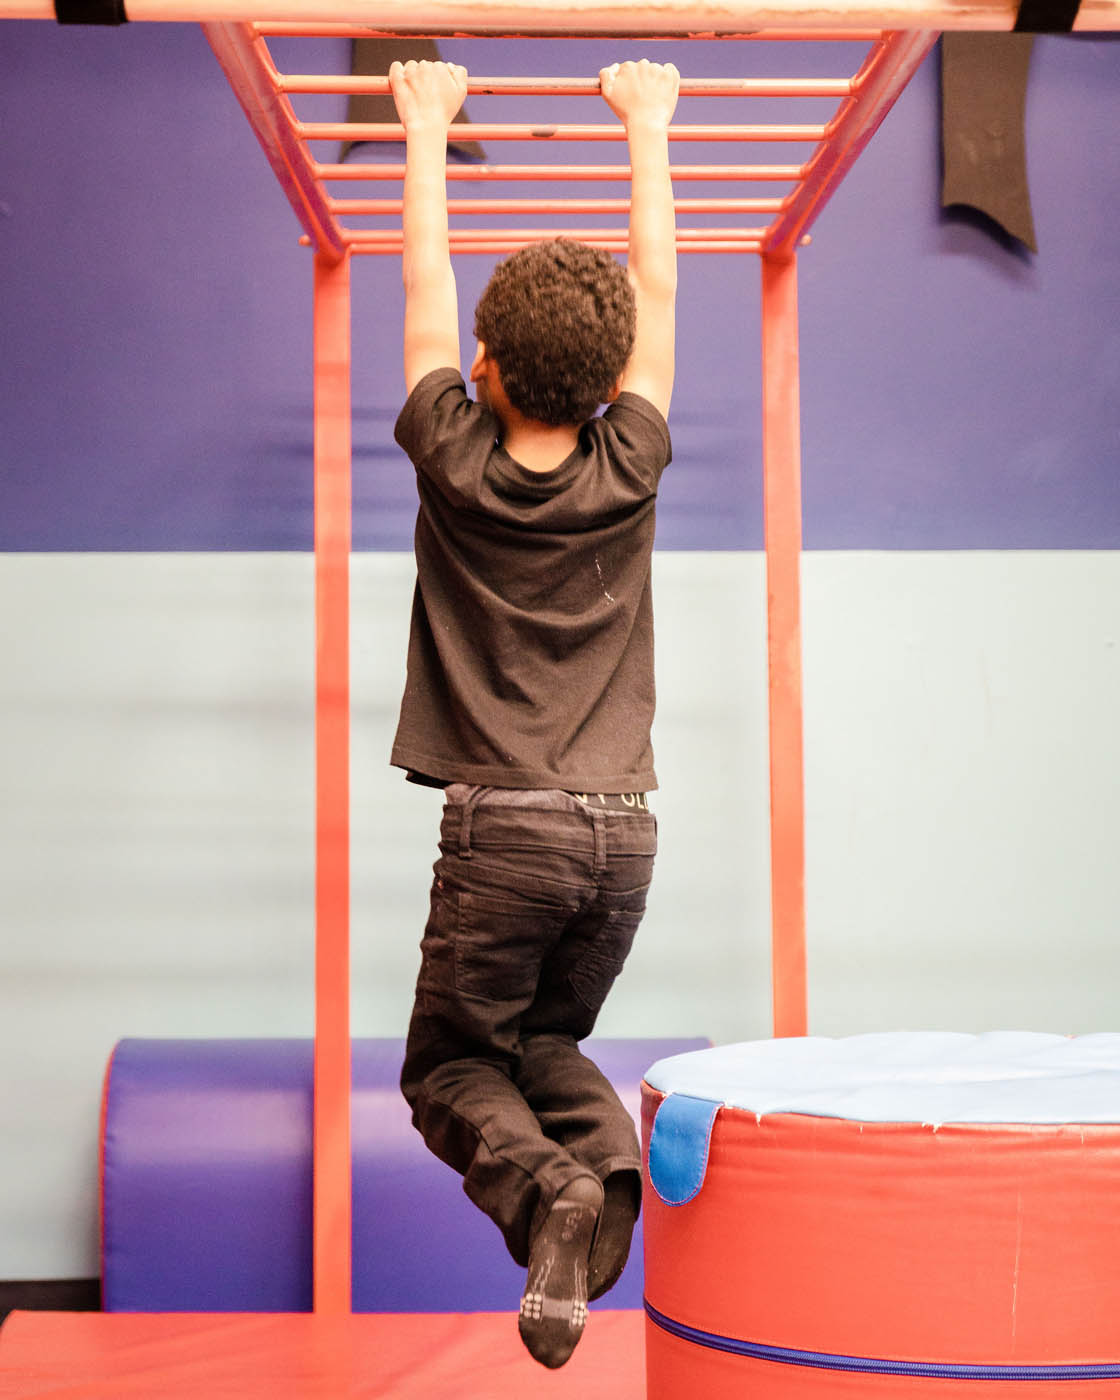 A boy swining on monkey bars in our kid-safe gym at Romp n' Roll.